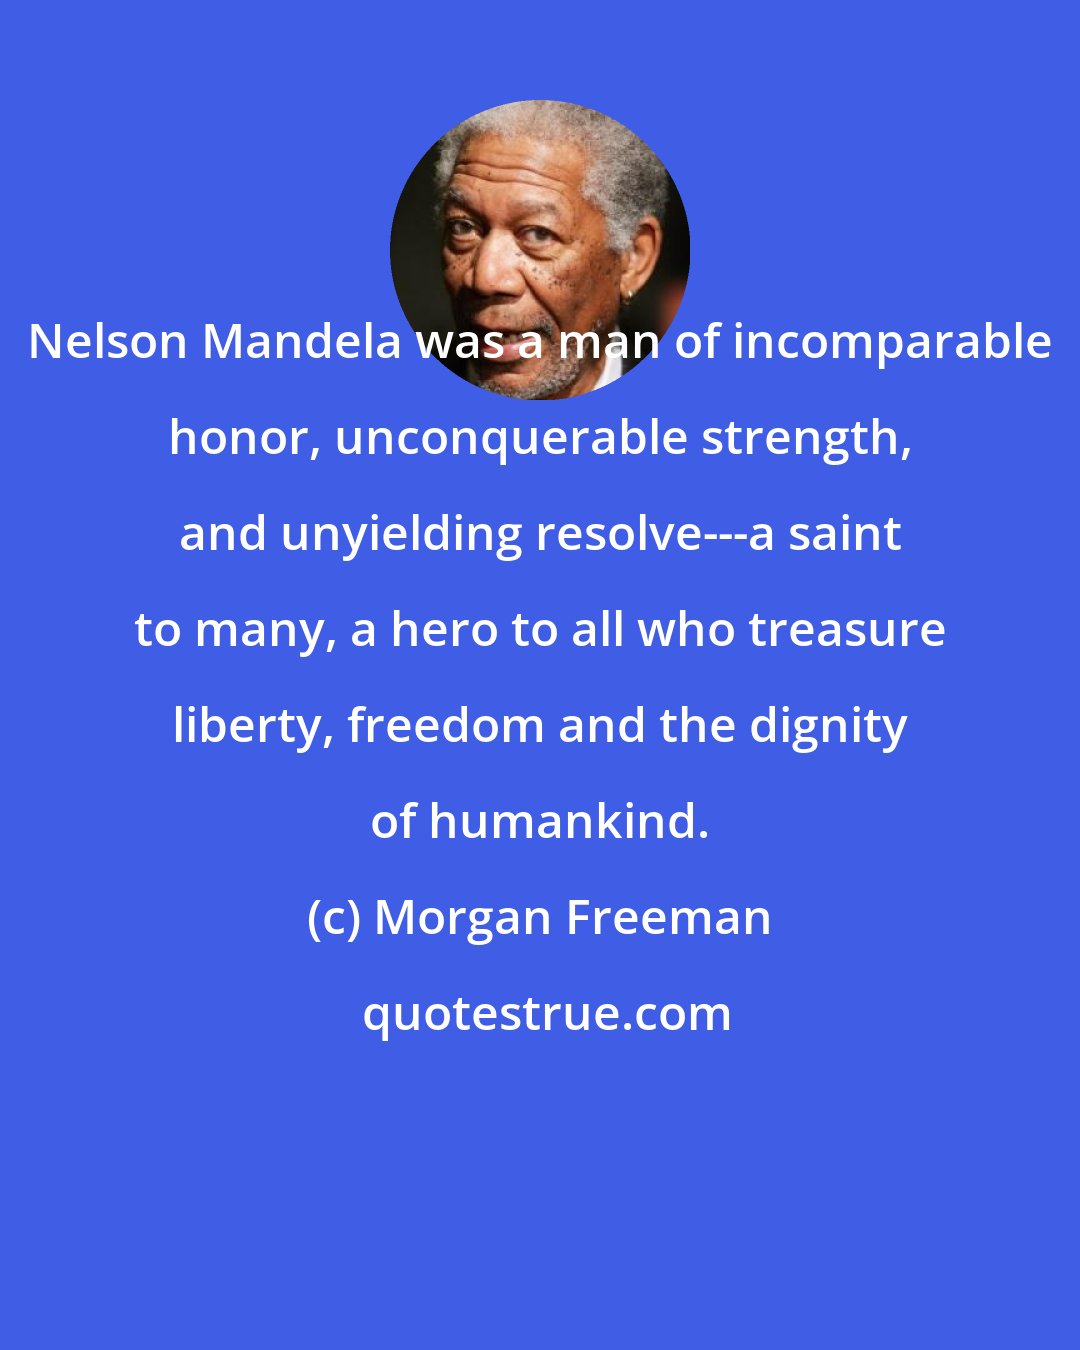 Morgan Freeman: Nelson Mandela was a man of incomparable honor, unconquerable strength, and unyielding resolve---a saint to many, a hero to all who treasure liberty, freedom and the dignity of humankind.